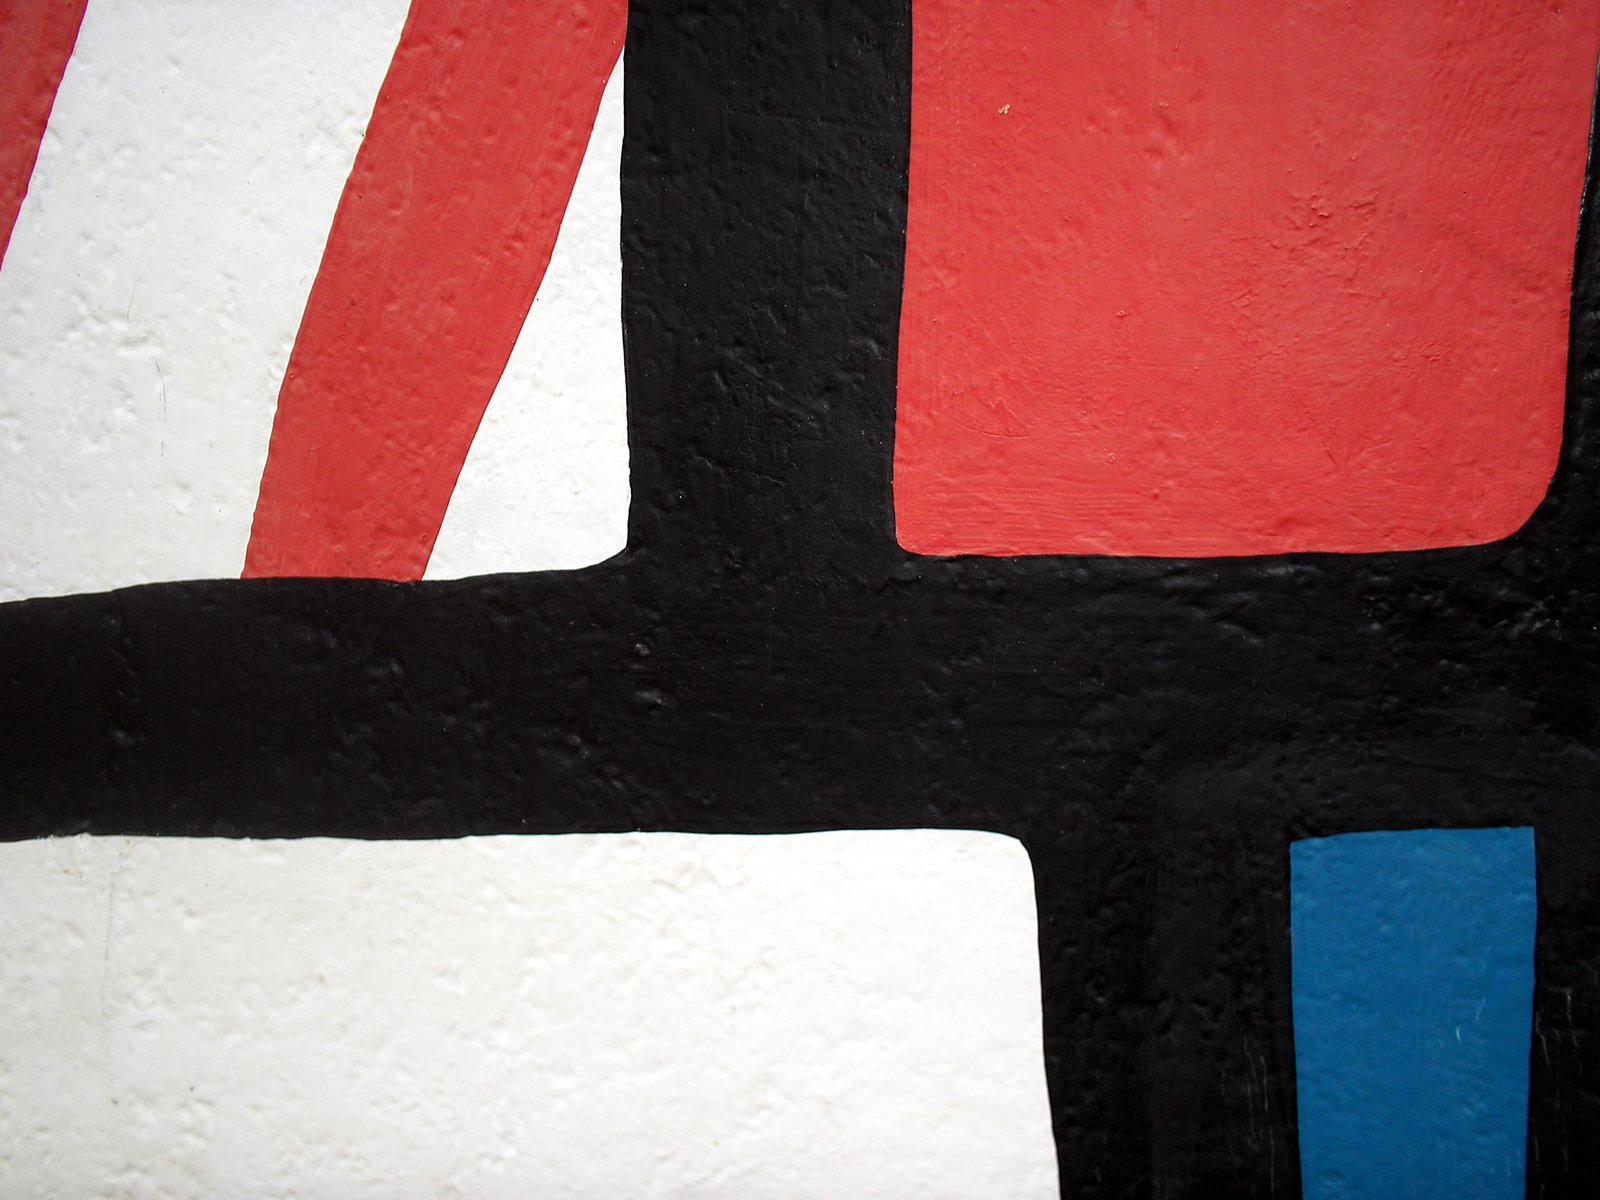 the abstract painting shows a black, red and white design